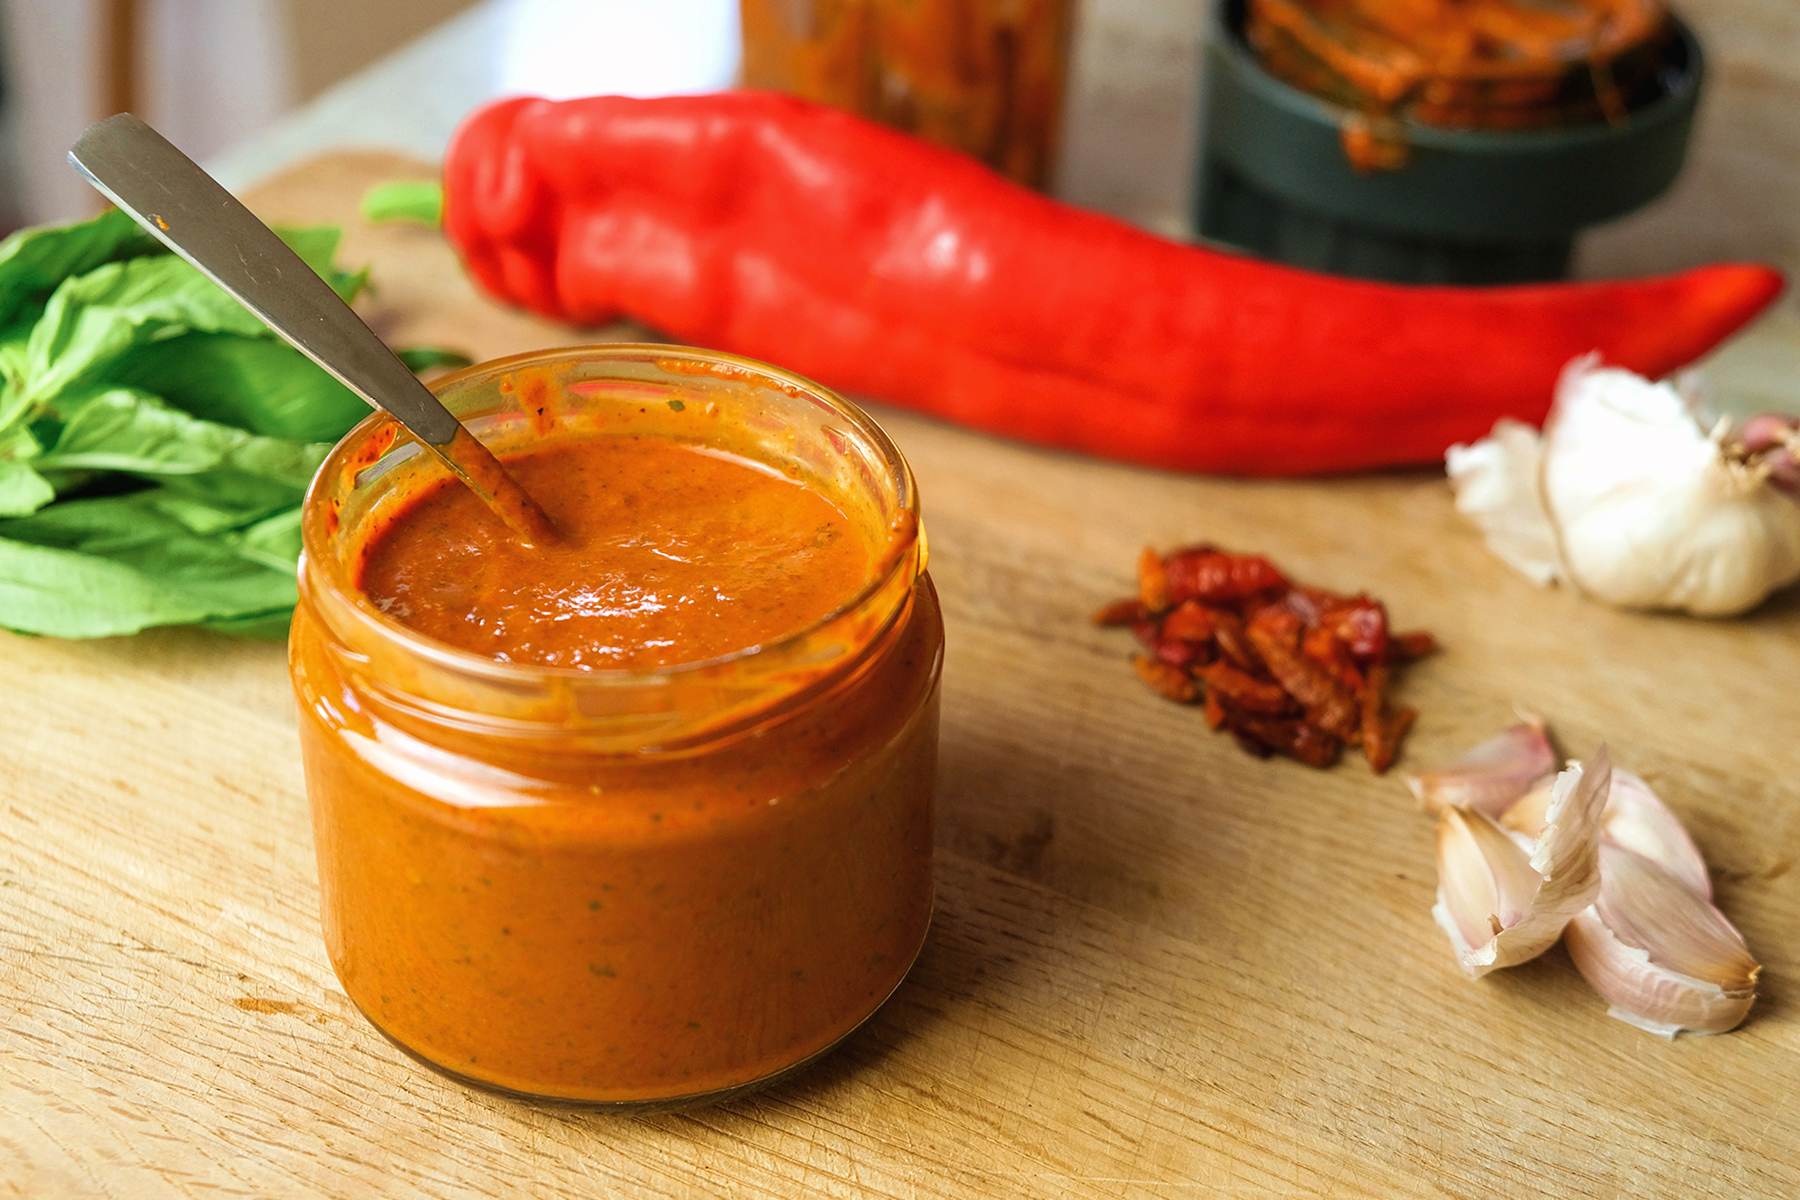 Spice Up Your Life with Vegetarian Peri Peri Sauce Recipes